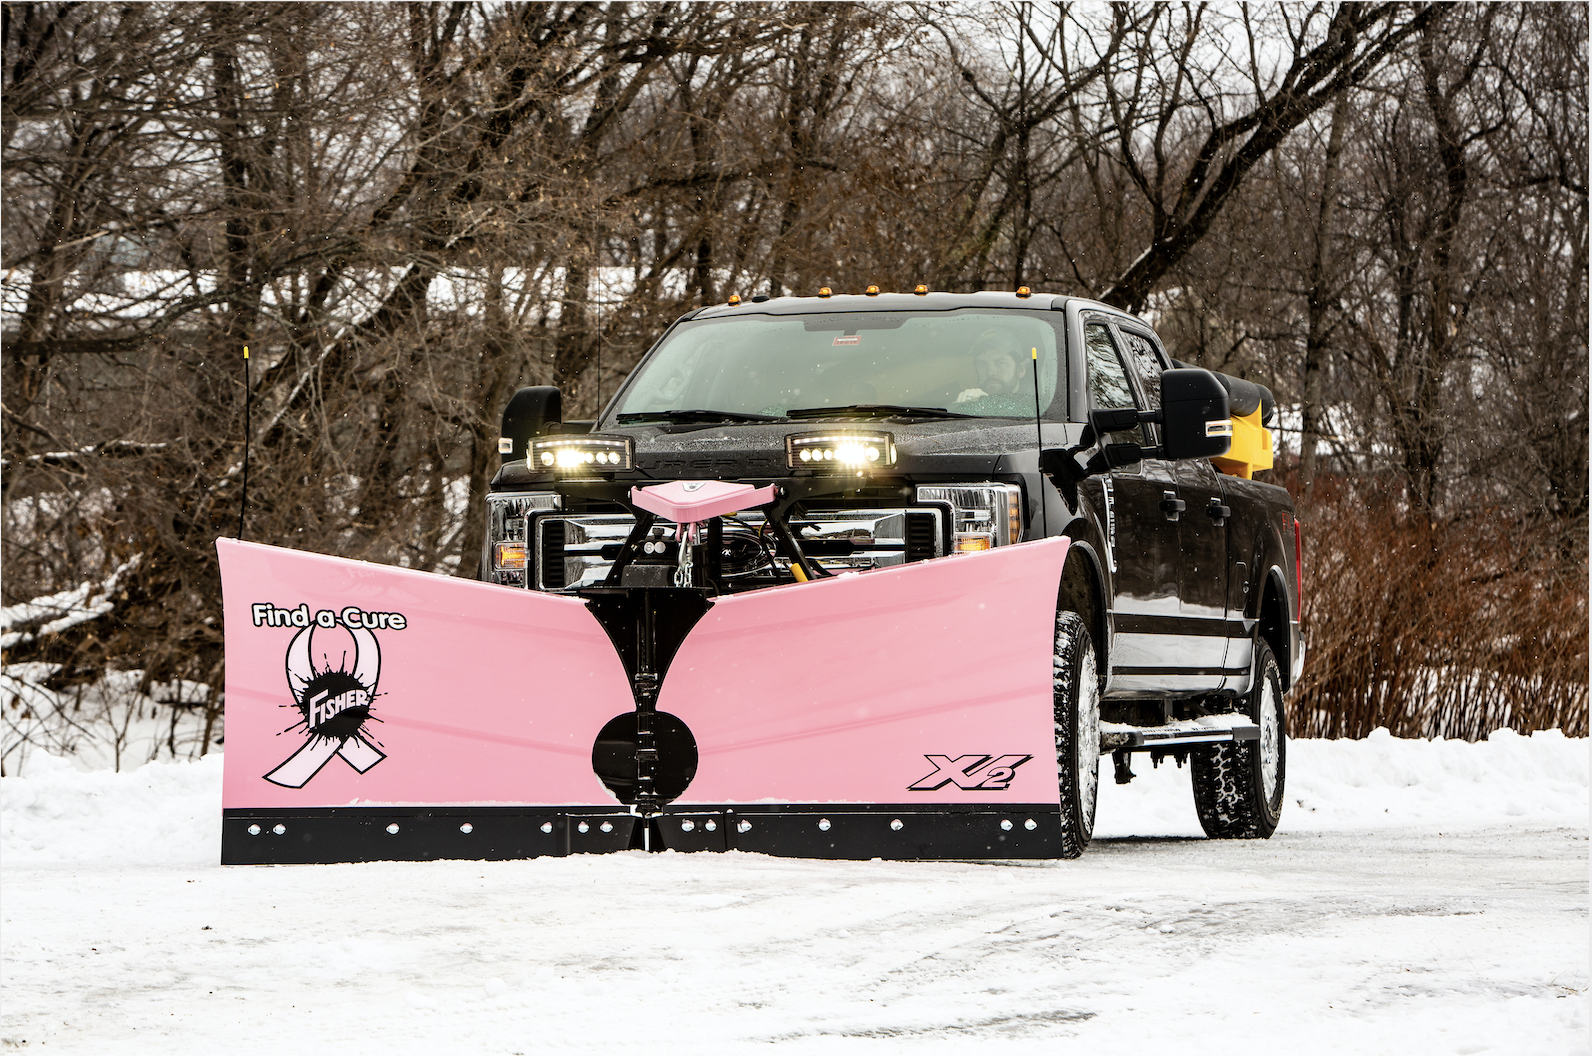 Fisher Engineering supports Breast Cancer Awareness Month with pink equipment